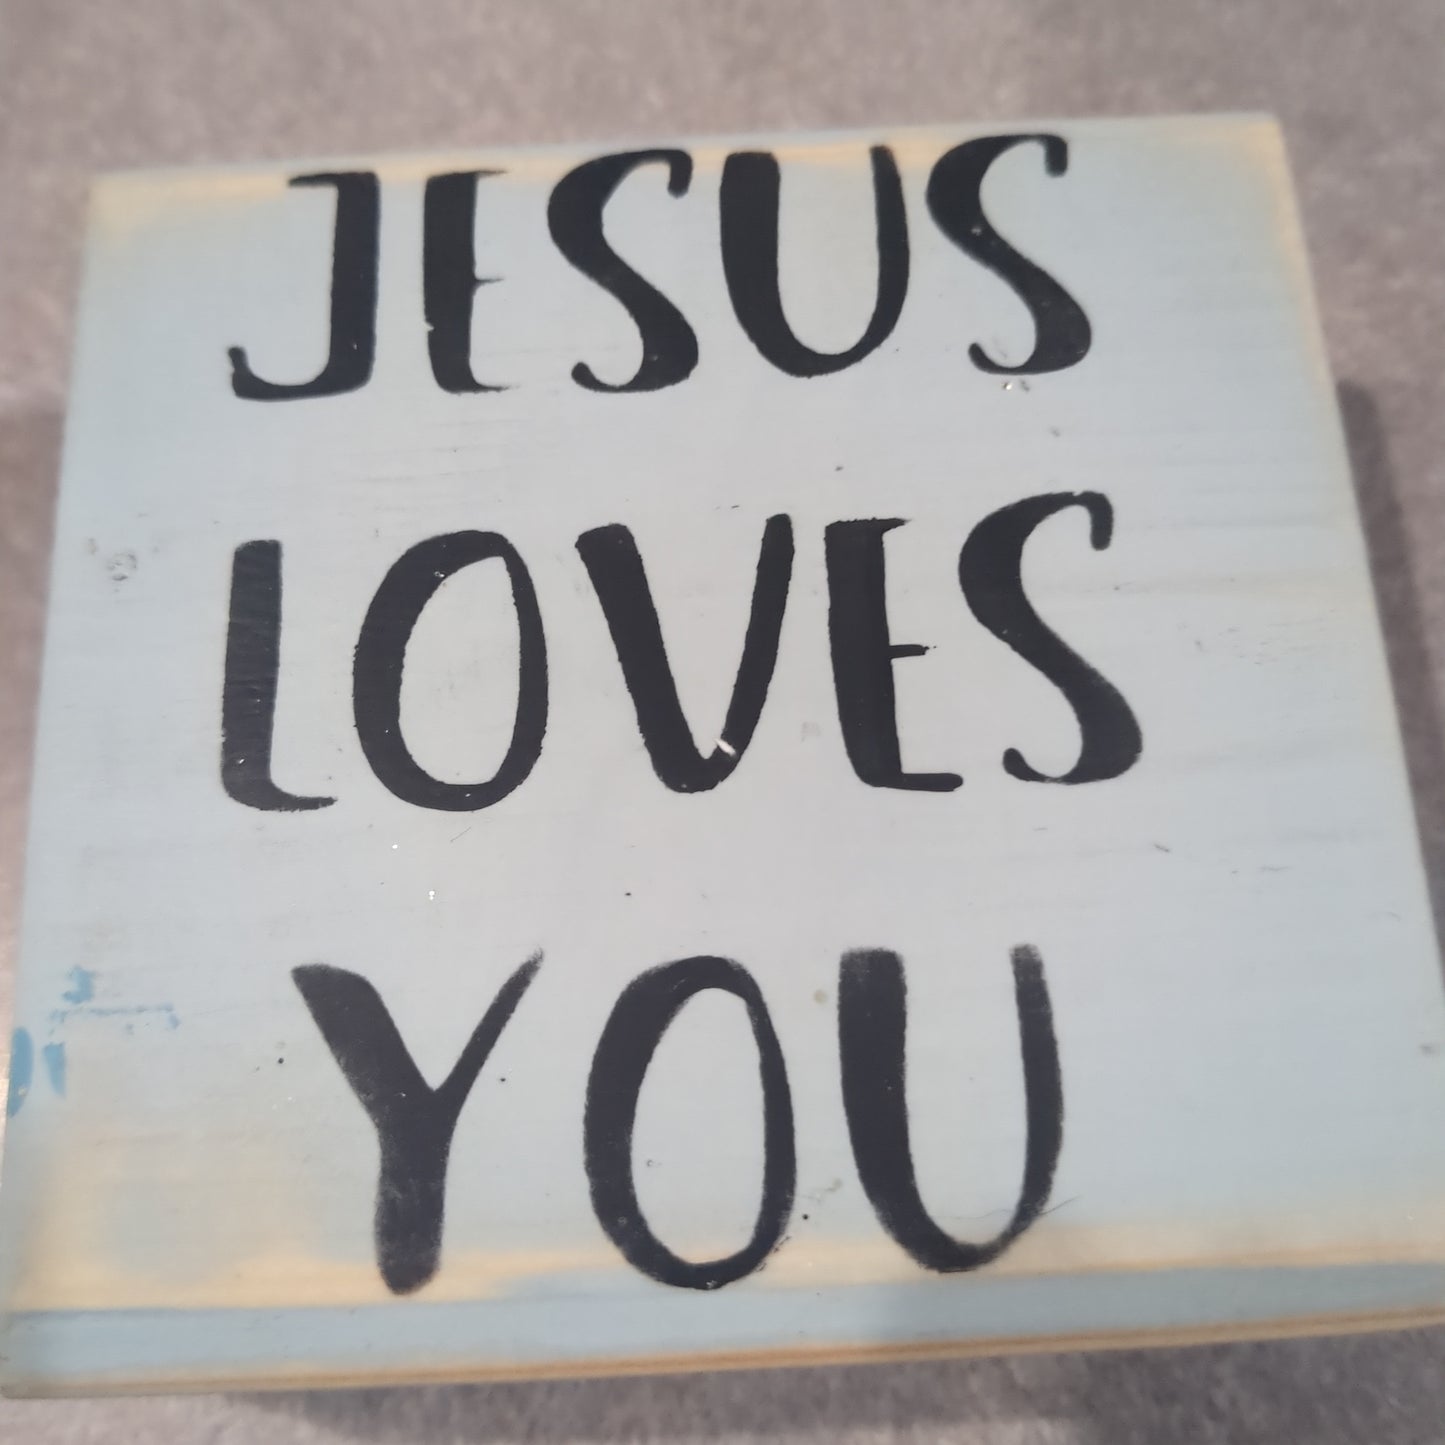 Wooden double sided sign 3 1/2" square